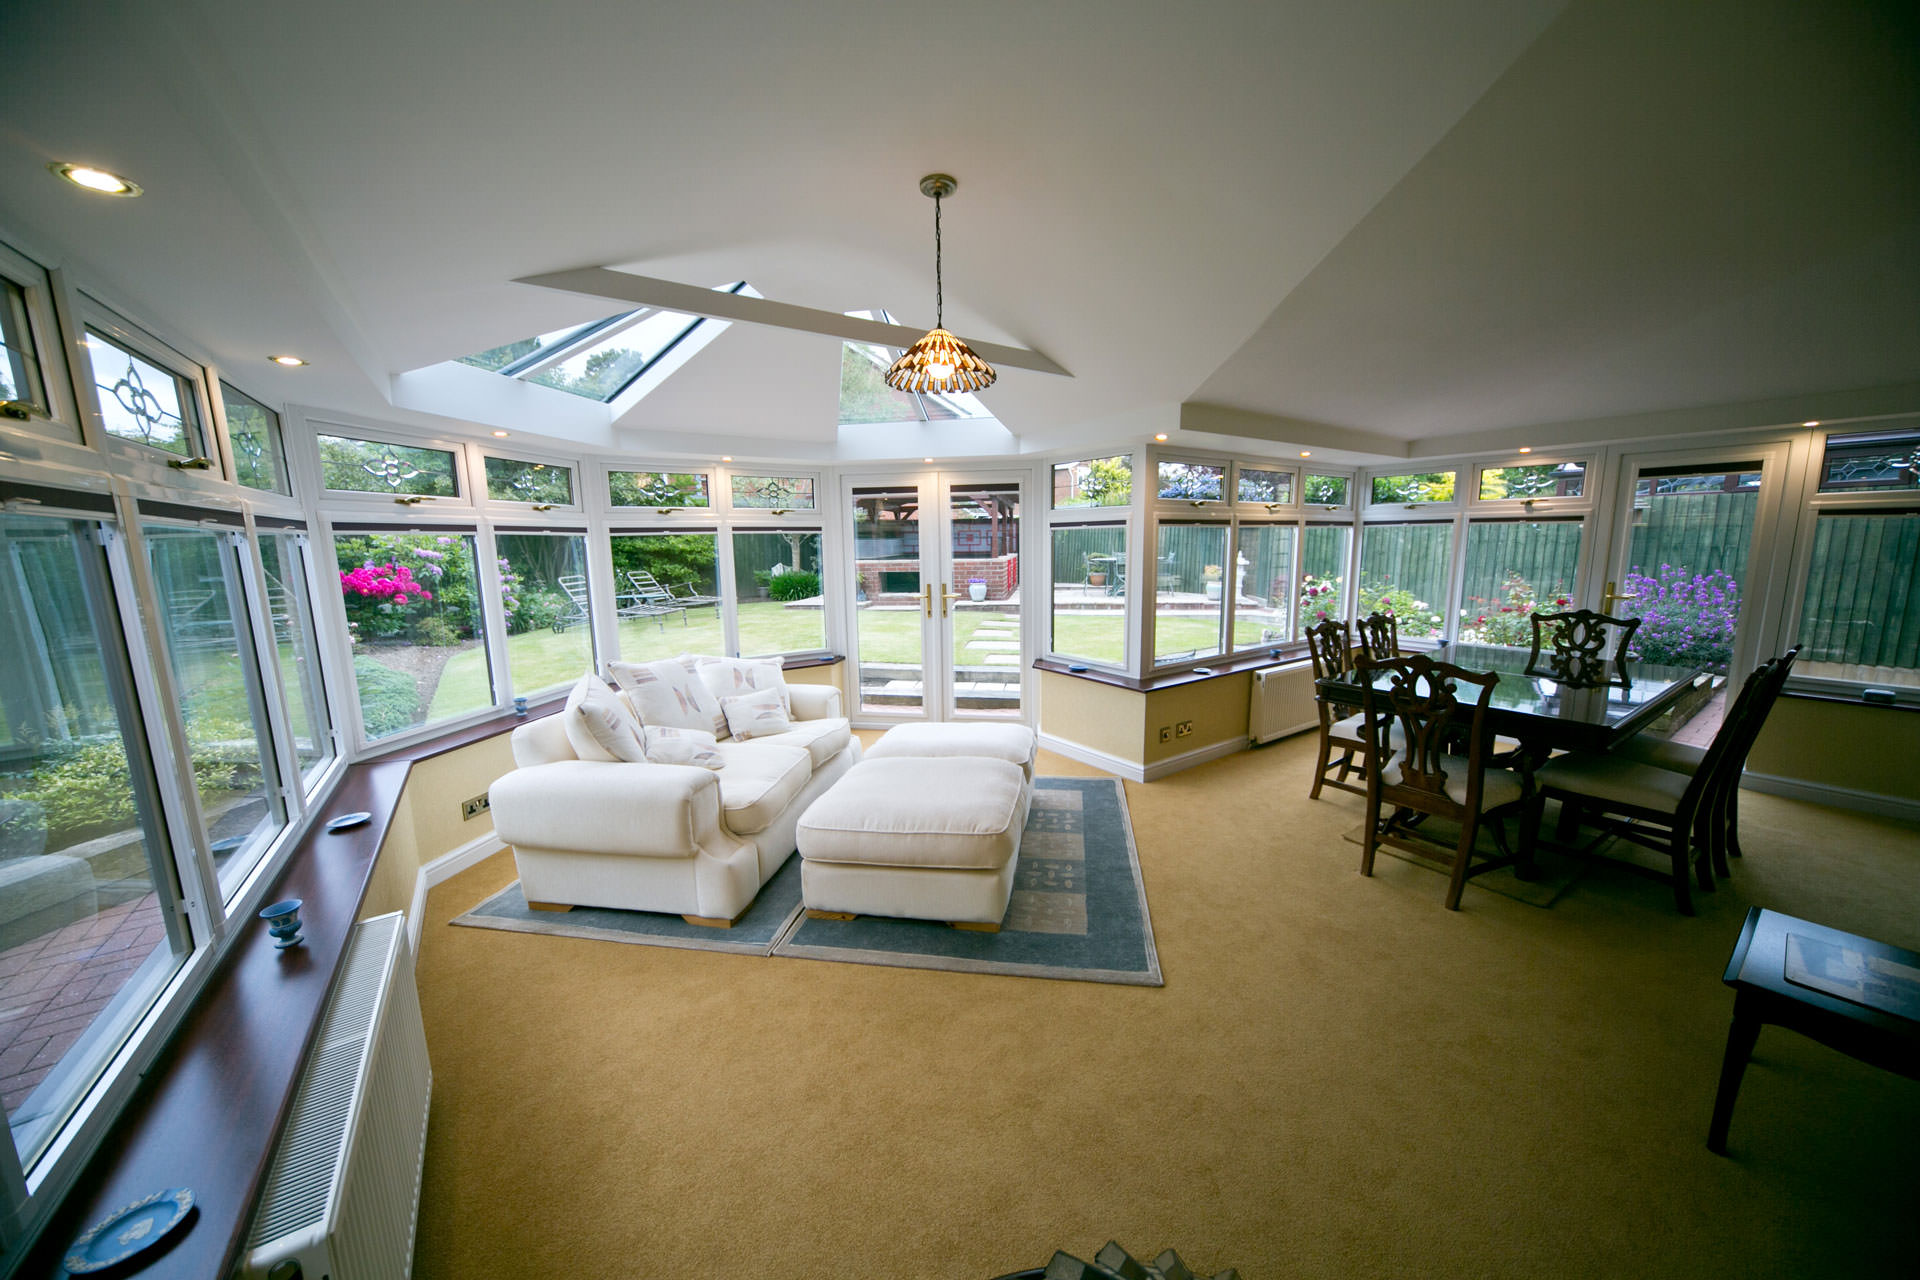 Conservatories quote rayleigh